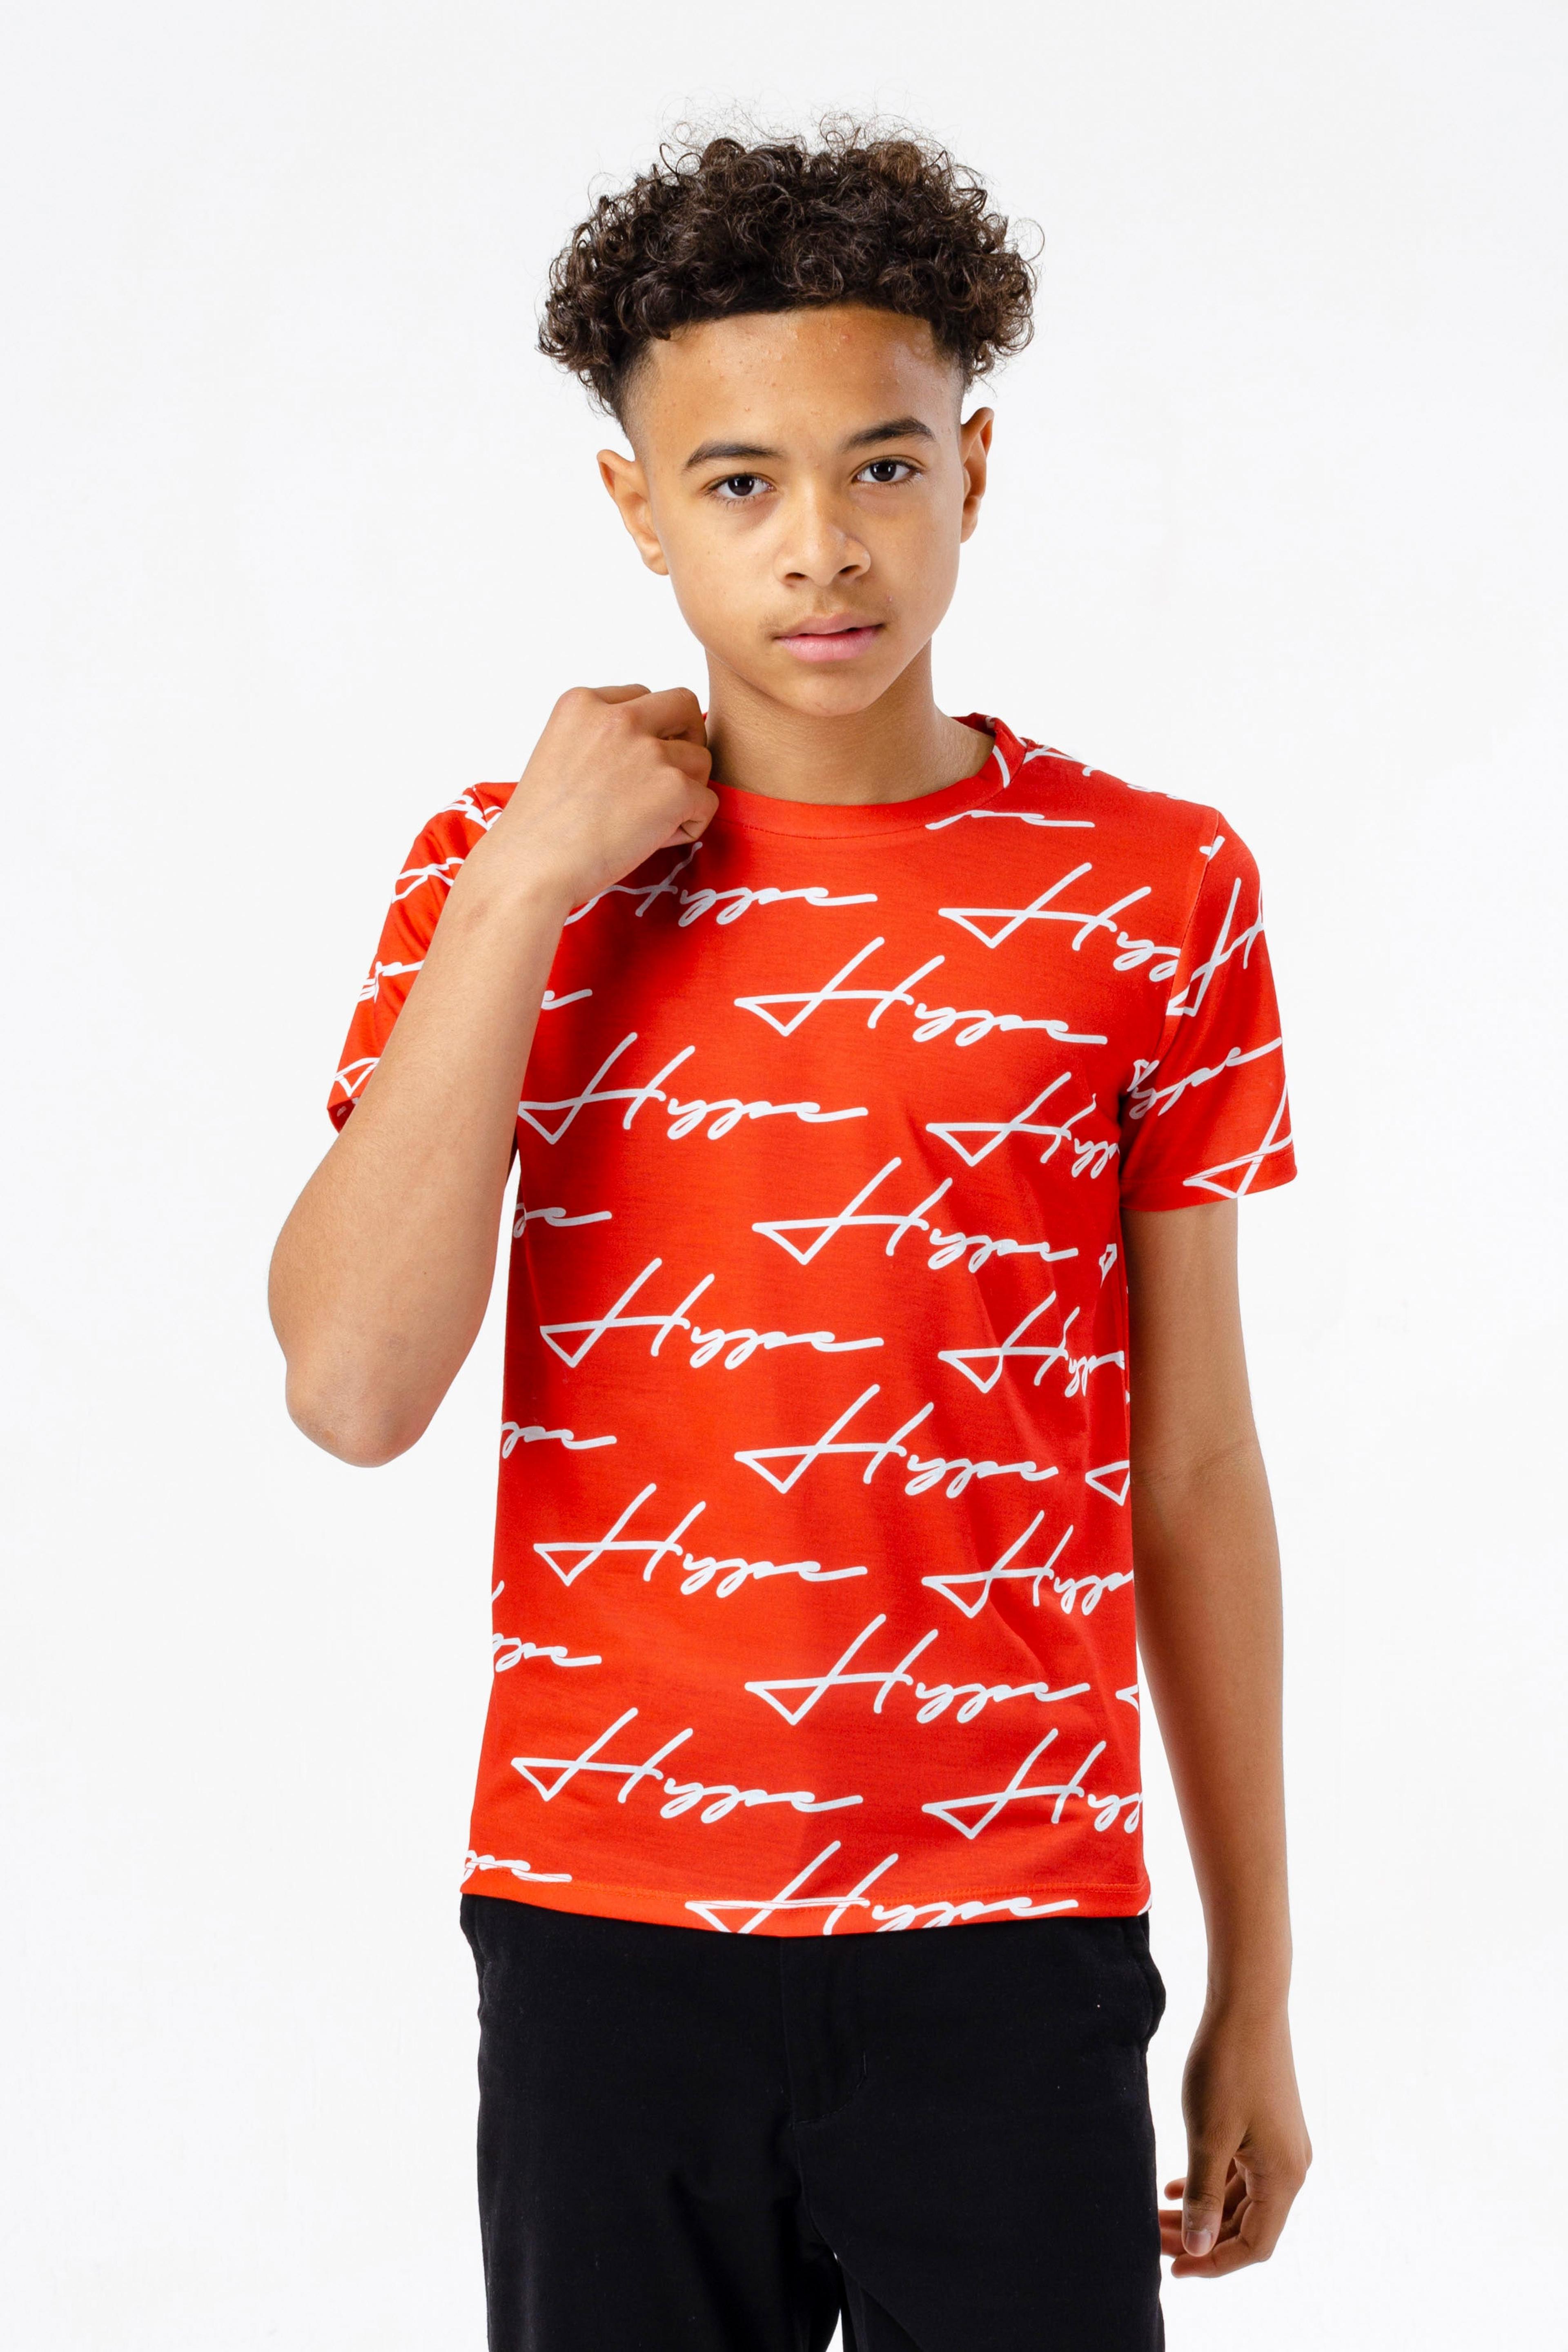 HYPE BOYS RED HAND SCRIBBLE T-SHIRT